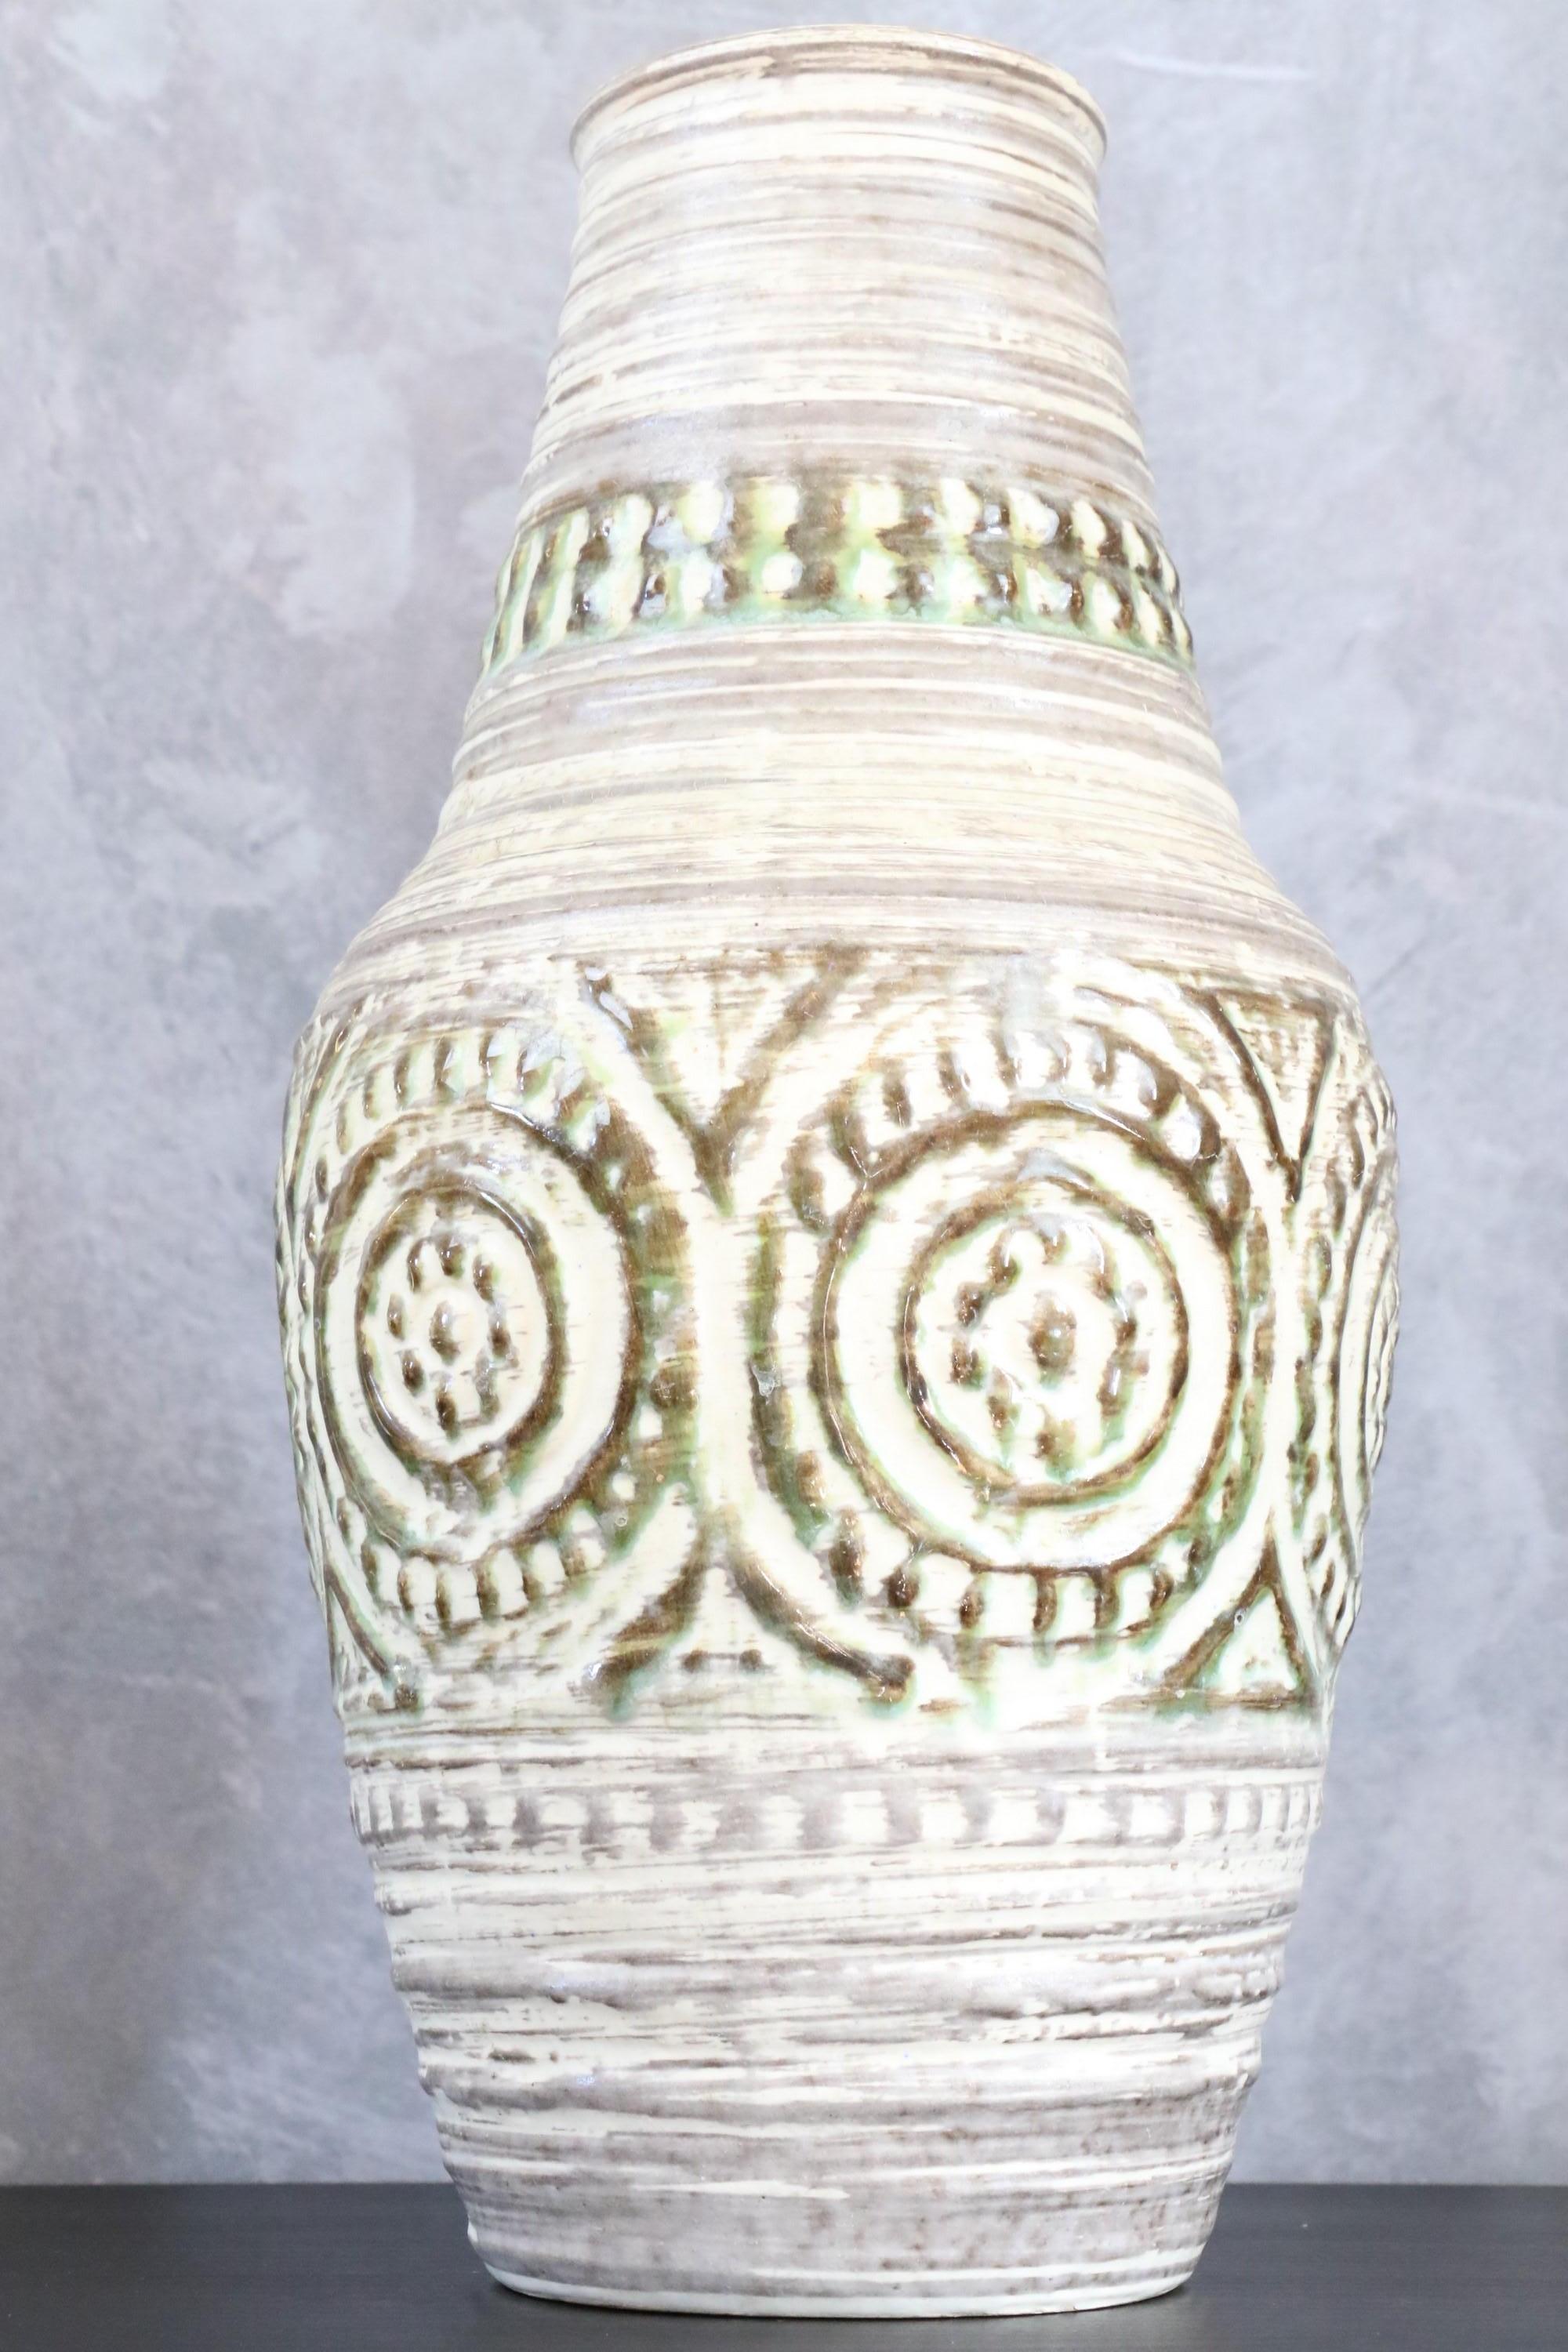 Large mid-century West Germany vase 116 33cm - grey ceramic vase - 1950s.

Ceramic glazed white-cream and decorated with circular patterns green slightly enhanced with brown.
The motifs in relief are slightly asymmetrical. This large vase is